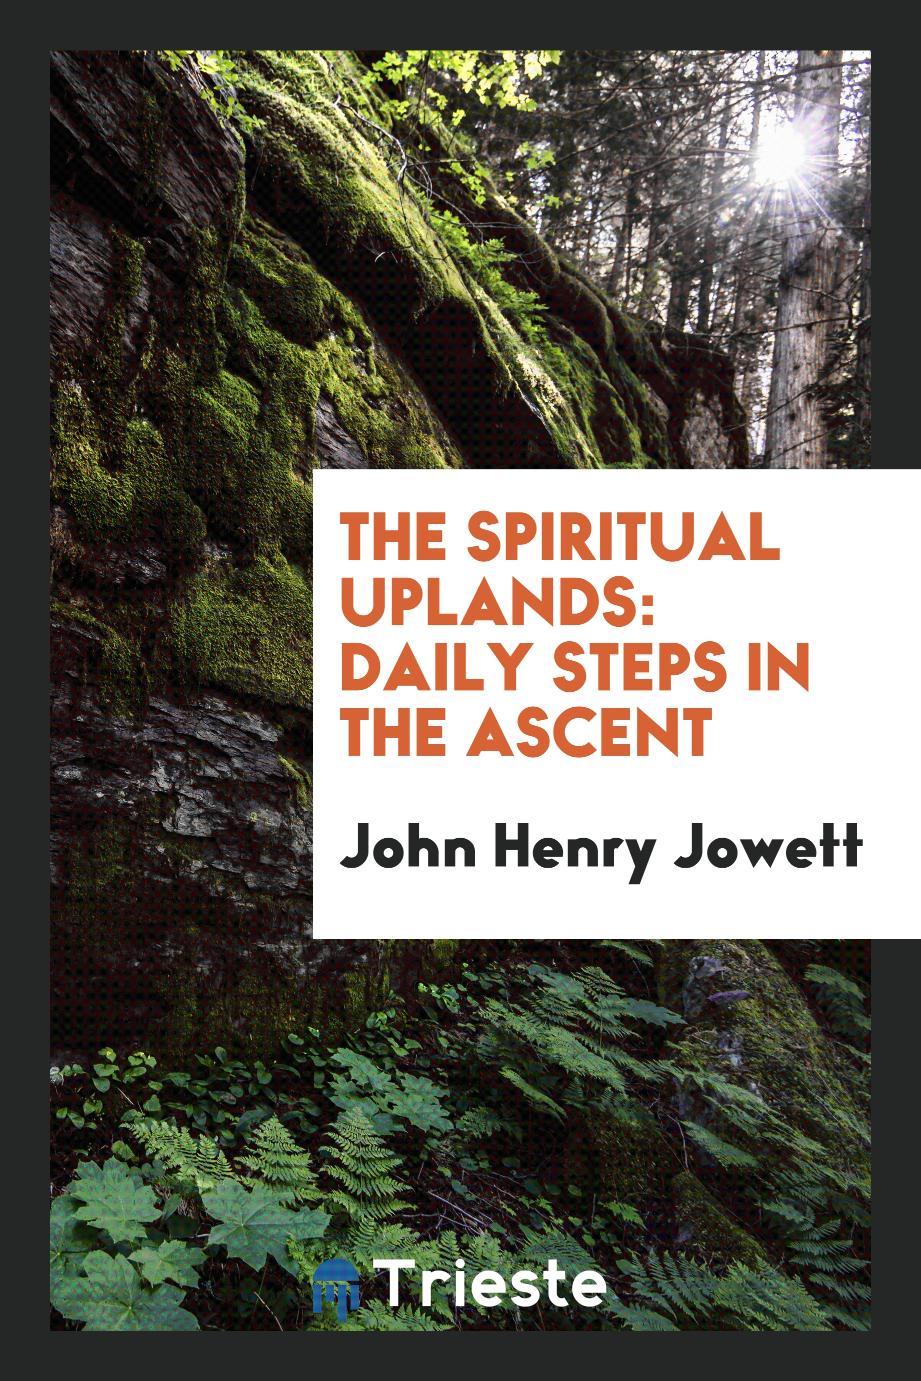 The Spiritual Uplands: Daily Steps in the Ascent